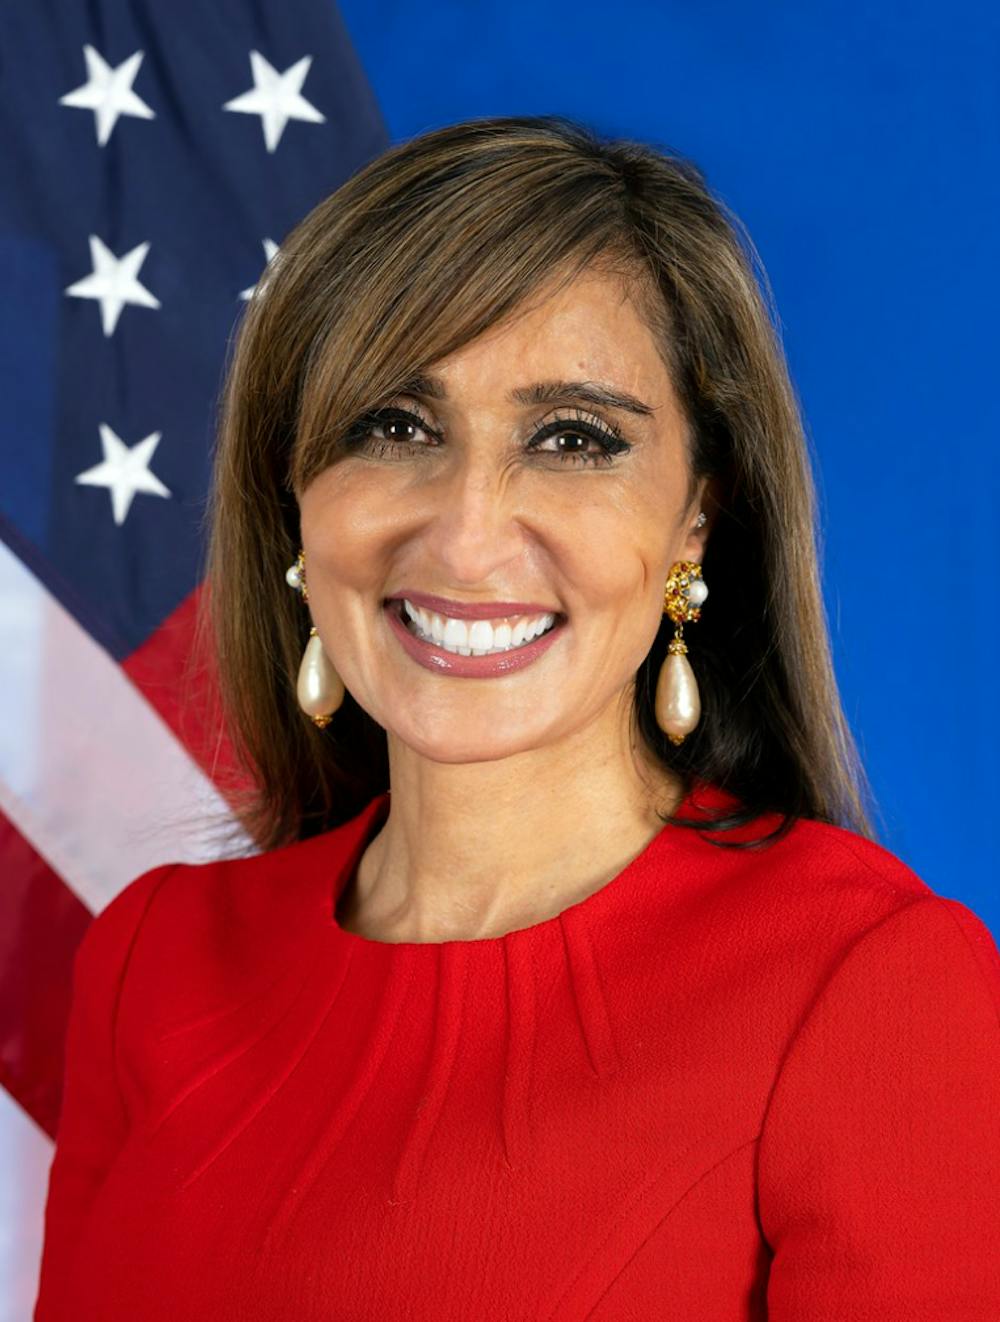 Razdan Duggal had her Senate hearing on Sept. 14, 2022, and the vote was unanimous. She would be sworn in as the new Ambassador to the Kingdom of the Netherlands.
